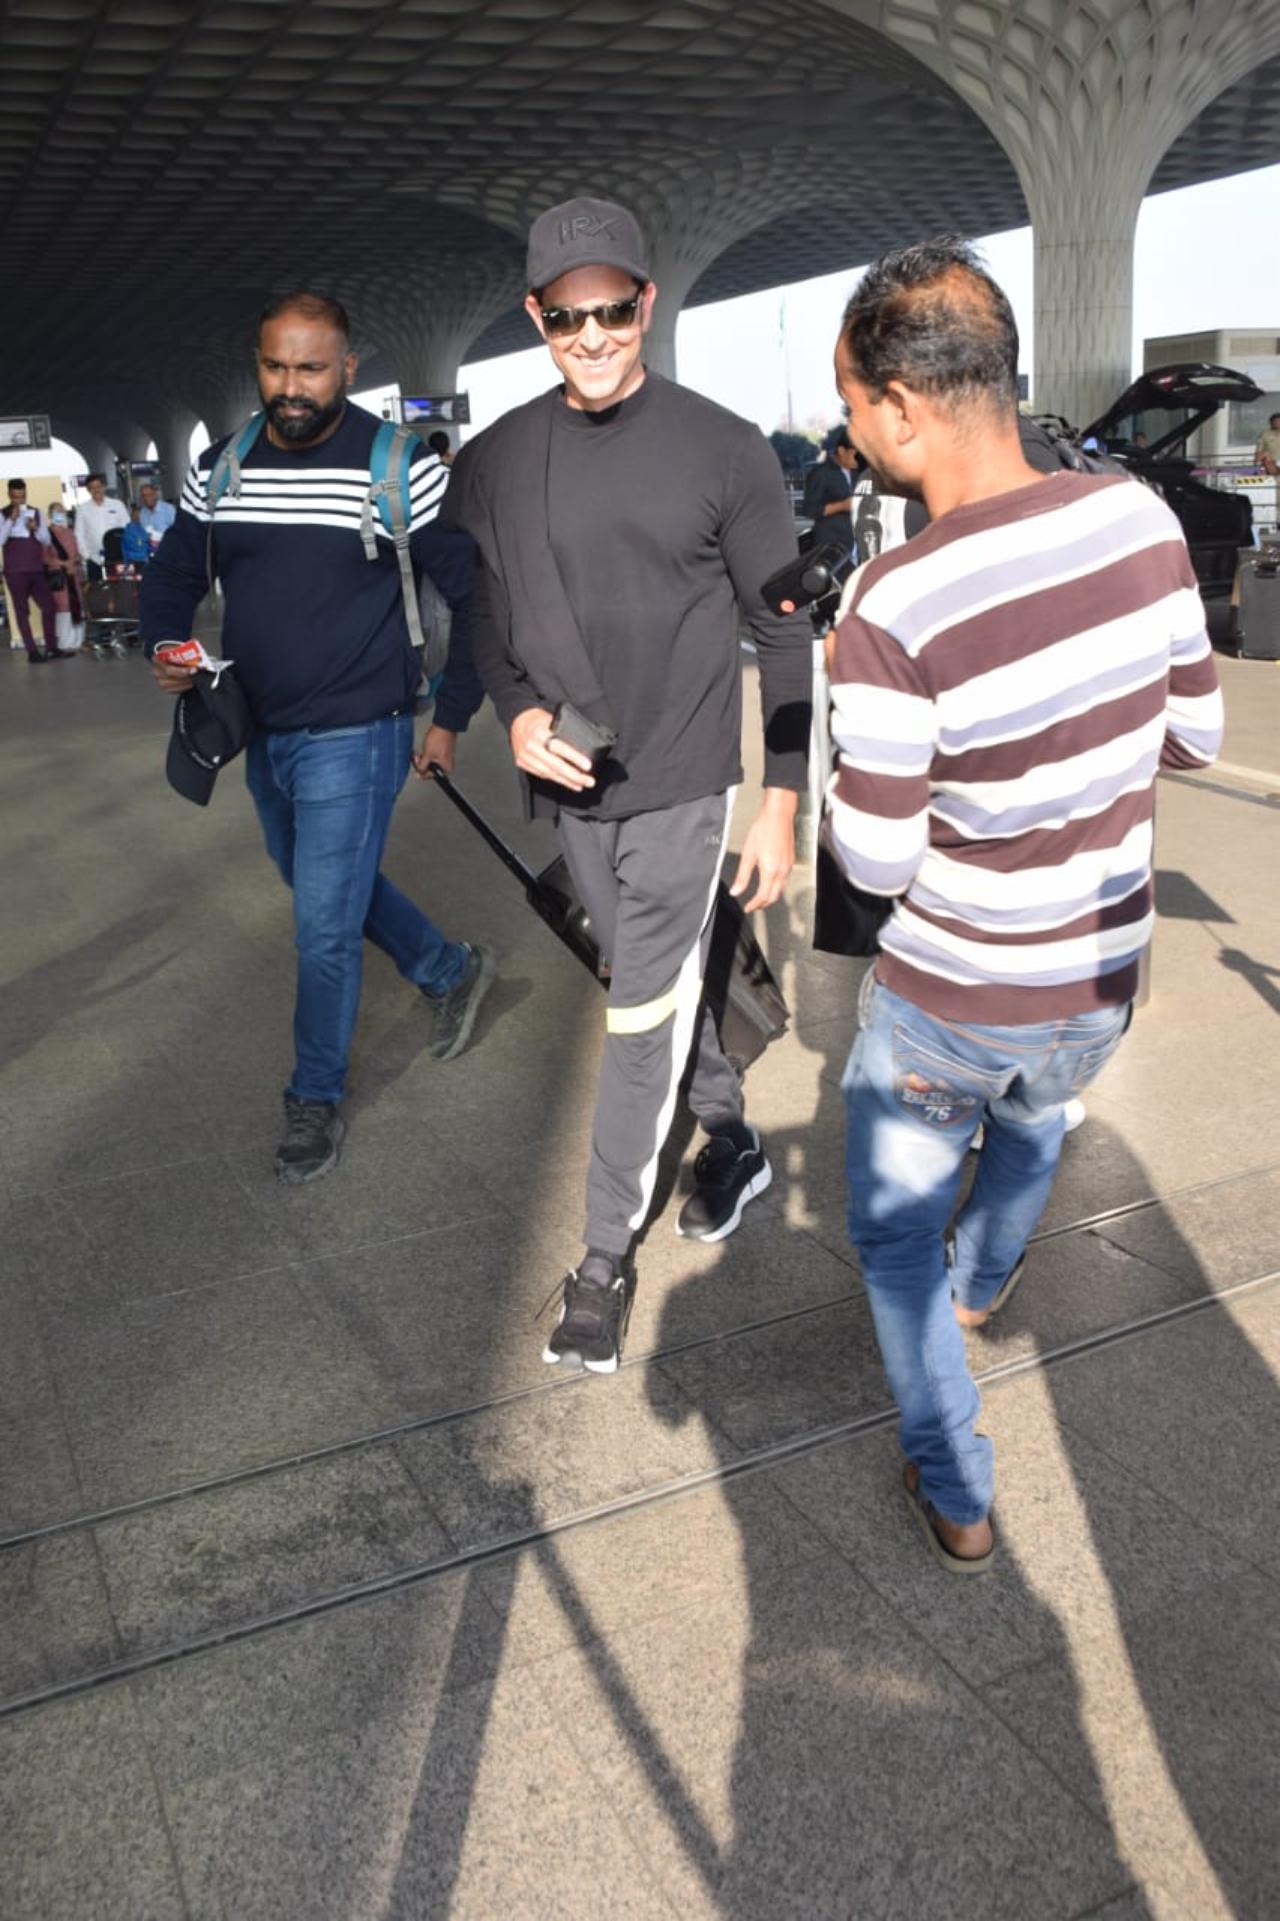 At the airport, Hrithik was also seen interacting with the paps, smiled and posed for them as well. A pap in a hurry to click pictures left his footwear on Hrithik's way. A very polite Hrithik laughed and inquired about the same